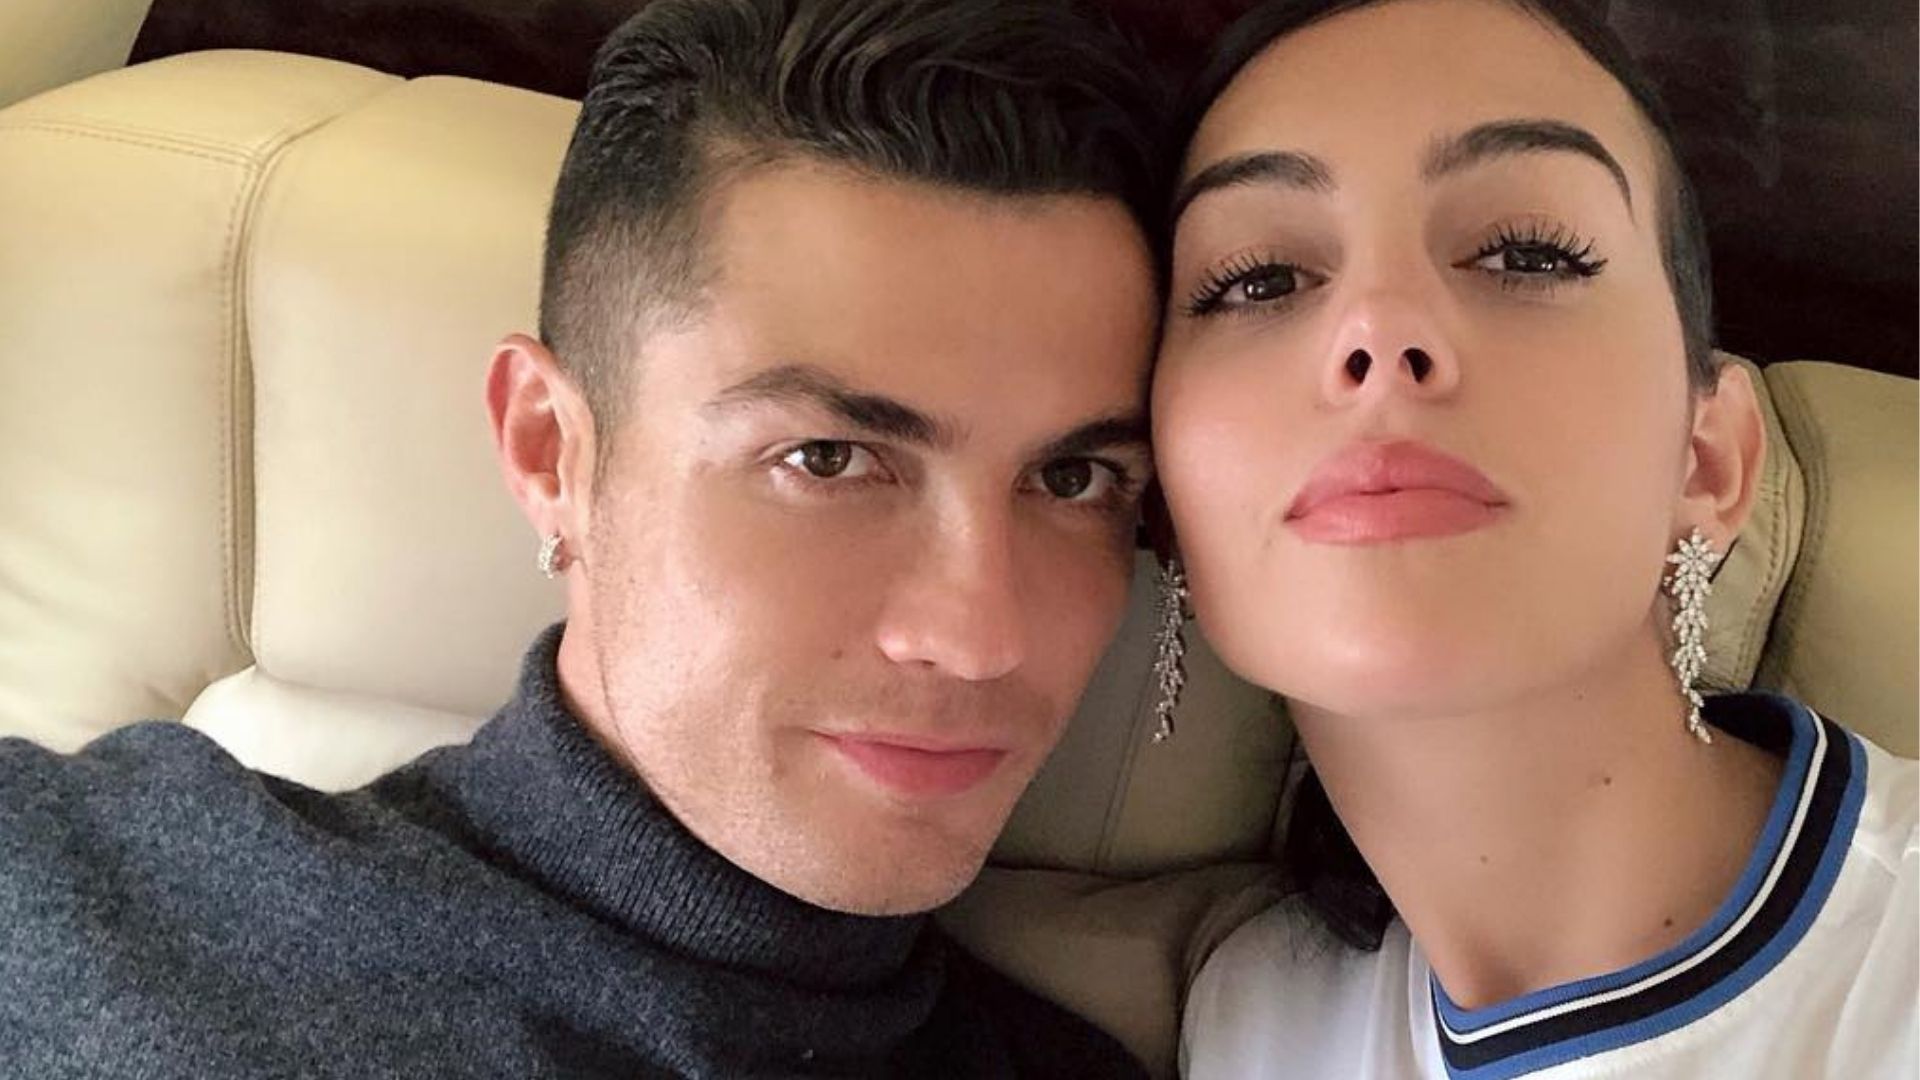 Ronaldos First Wife : Cristiano Ronaldo Dated The World S Hottest Women From Kim Kardashian To Irina Shayk Before Meeting Georgina Rodriguez - Movies with cheating wives and girlfriends!